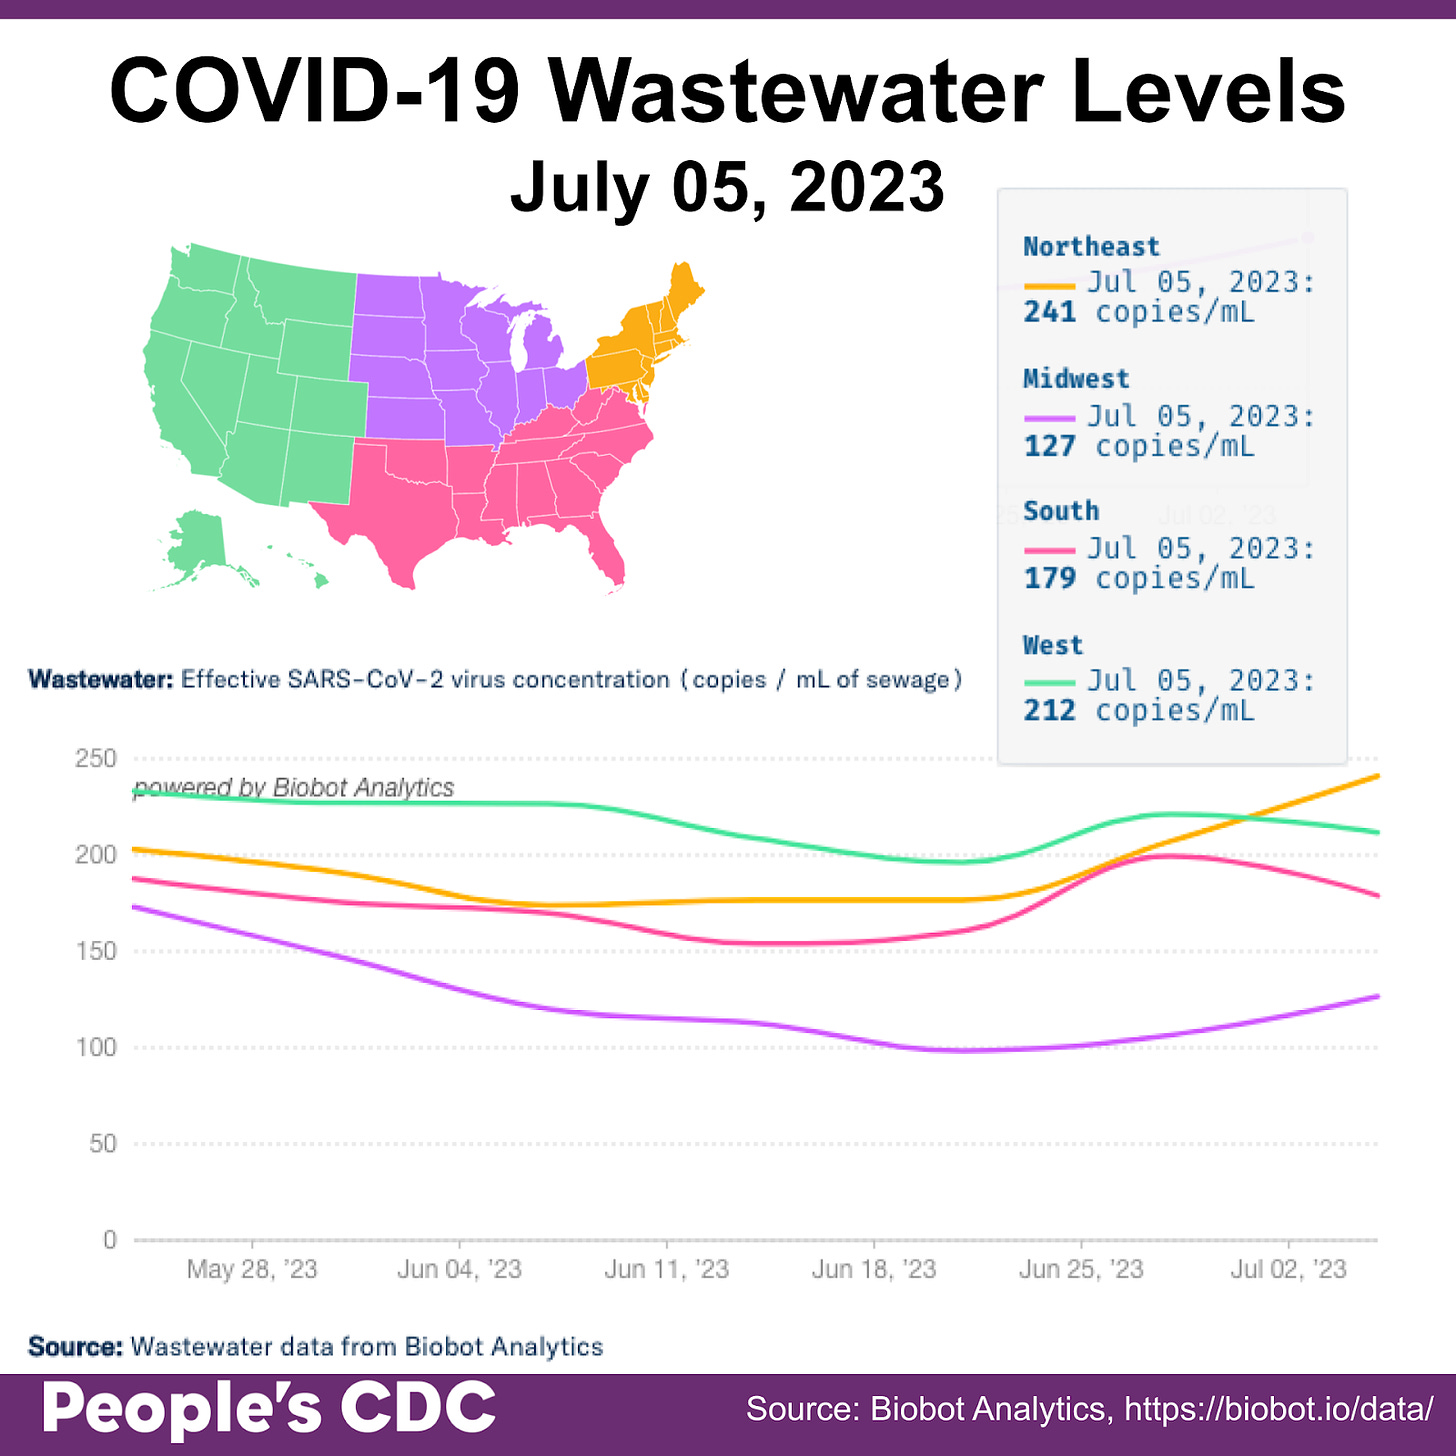 Title reads “COVID-19 Wastewater Levels As of July 5, 2023.” A map of the United States in the upper right corner serves as a key. The West is green, Midwest is purple, South is pink, and Northeast is orange. A graph on the bottom is titled “Wastewater: Effective SARS-CoV-2 virus concentration (copies / mL of sewage).” The line graph shows dates between May 28, 2023 and July 2, 2023 with regional virus concentrations plateauing through late May into mid June, but rising in the Northeast and Midwest from late June into early July. A key on the right side states concentration as of July 5, 2023: 248 copies / mL (Northeast), 127 copies / mL (Midwest), 179 copies / mL (South), and 212 copies / mL (West).